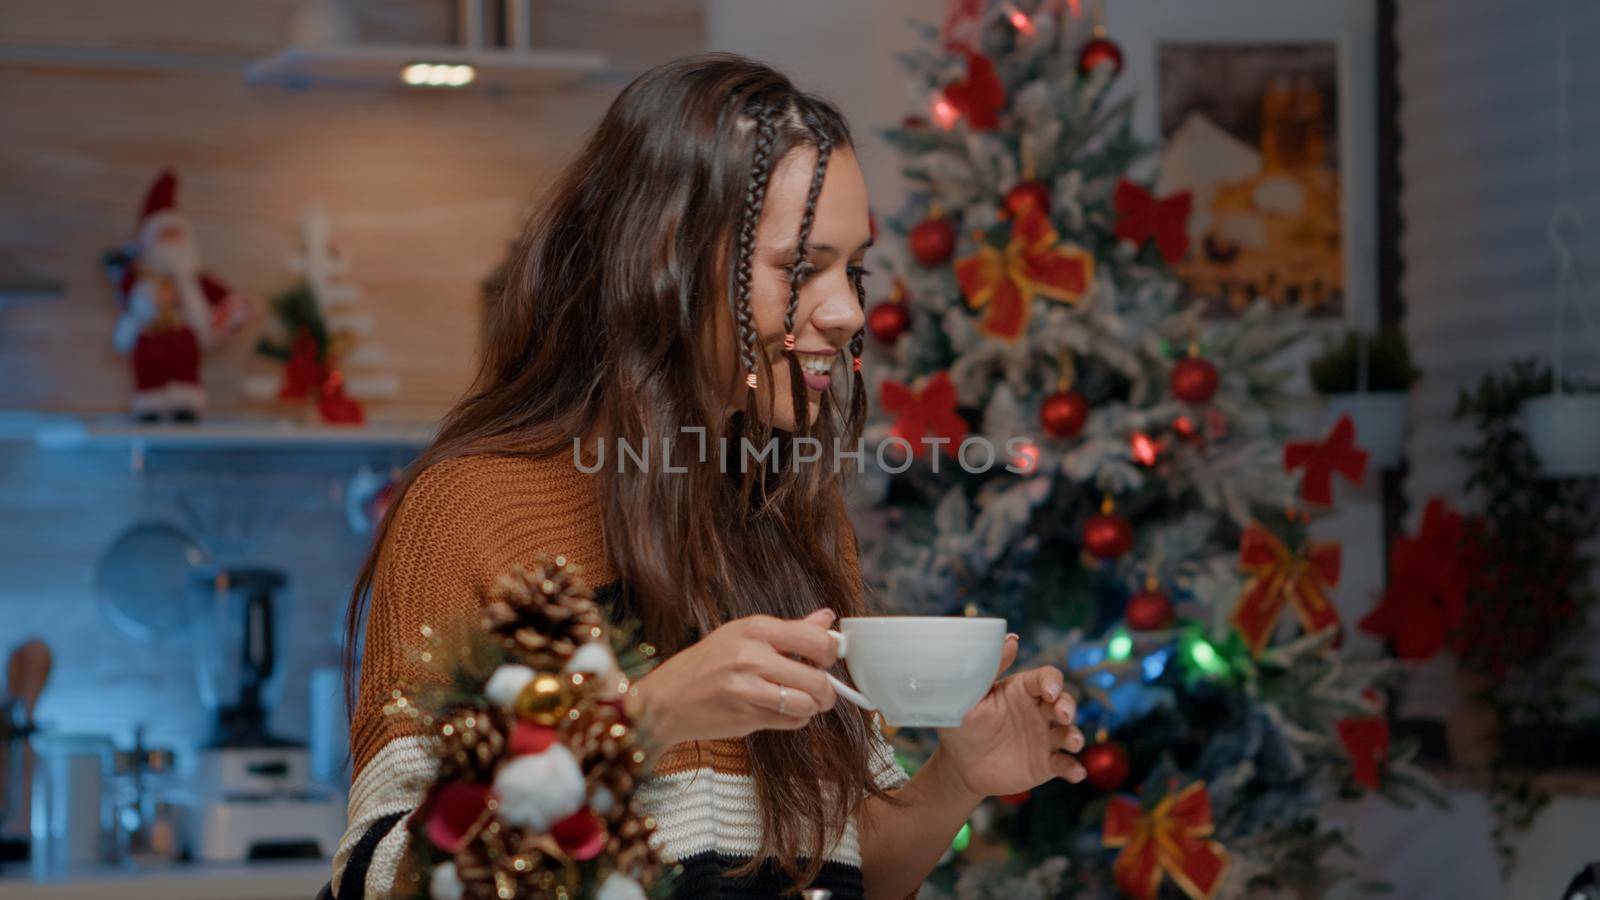 Caucasian woman holding cup of coffee while using video call in kitchen with christmas decorations. Young adult chatting with family while enjoying winter festivity wearing sweater